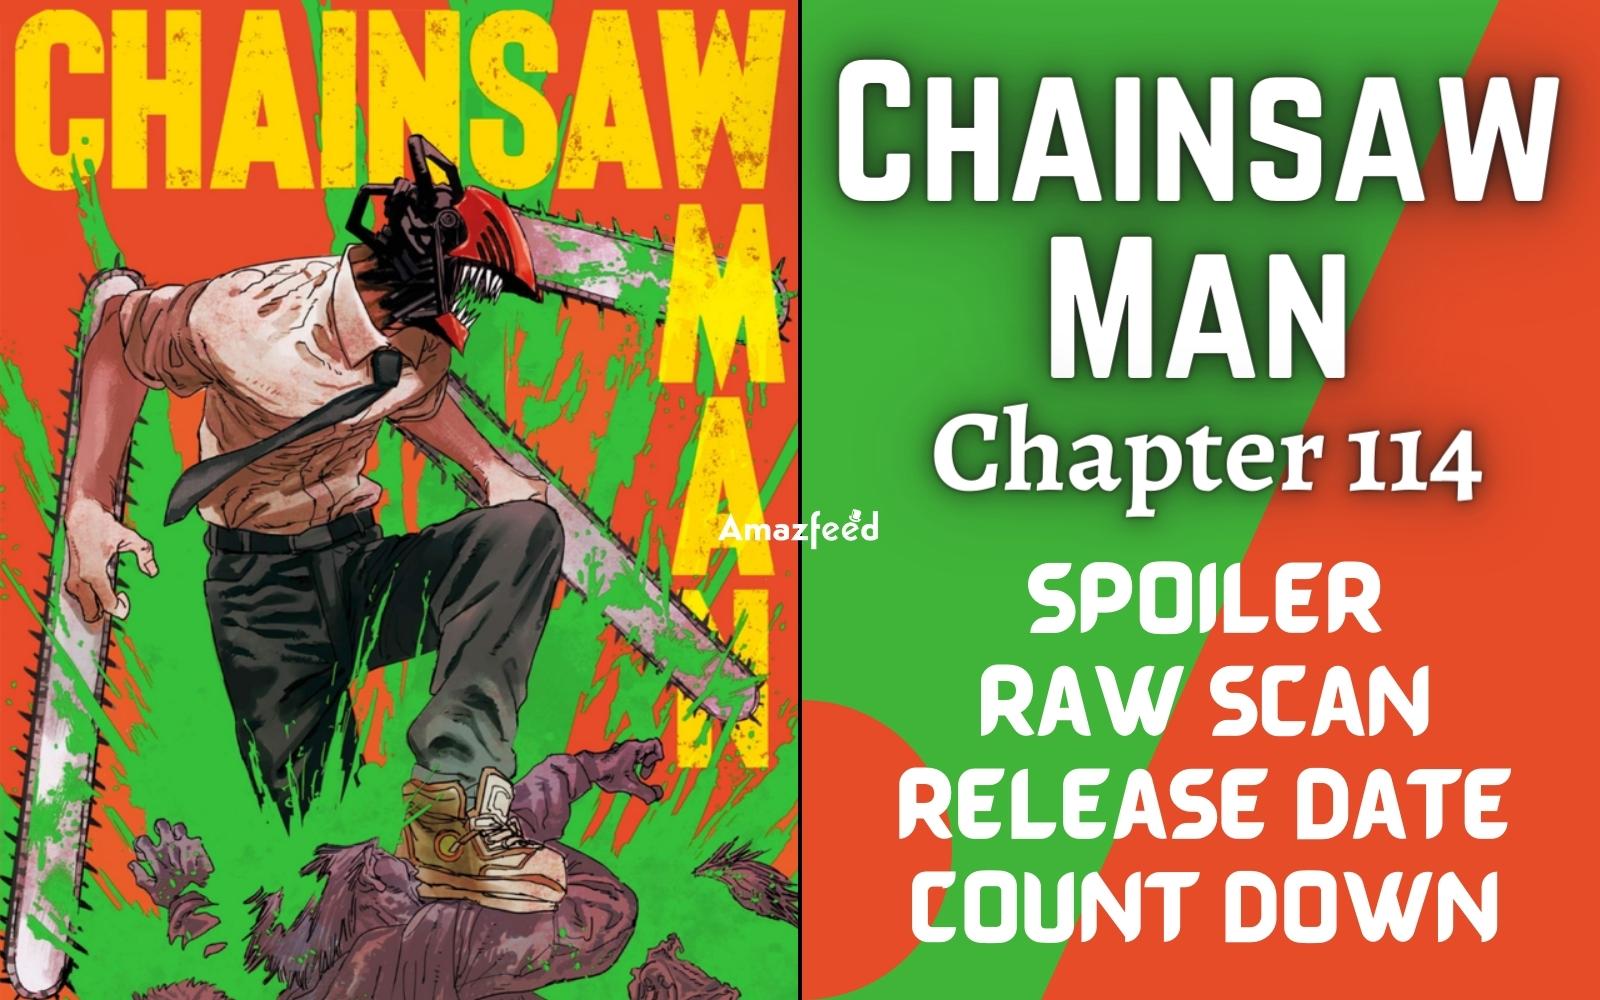 Chainsaw Man Chapter 114 Spoiler, Raw Scan, Release Date, Color Page